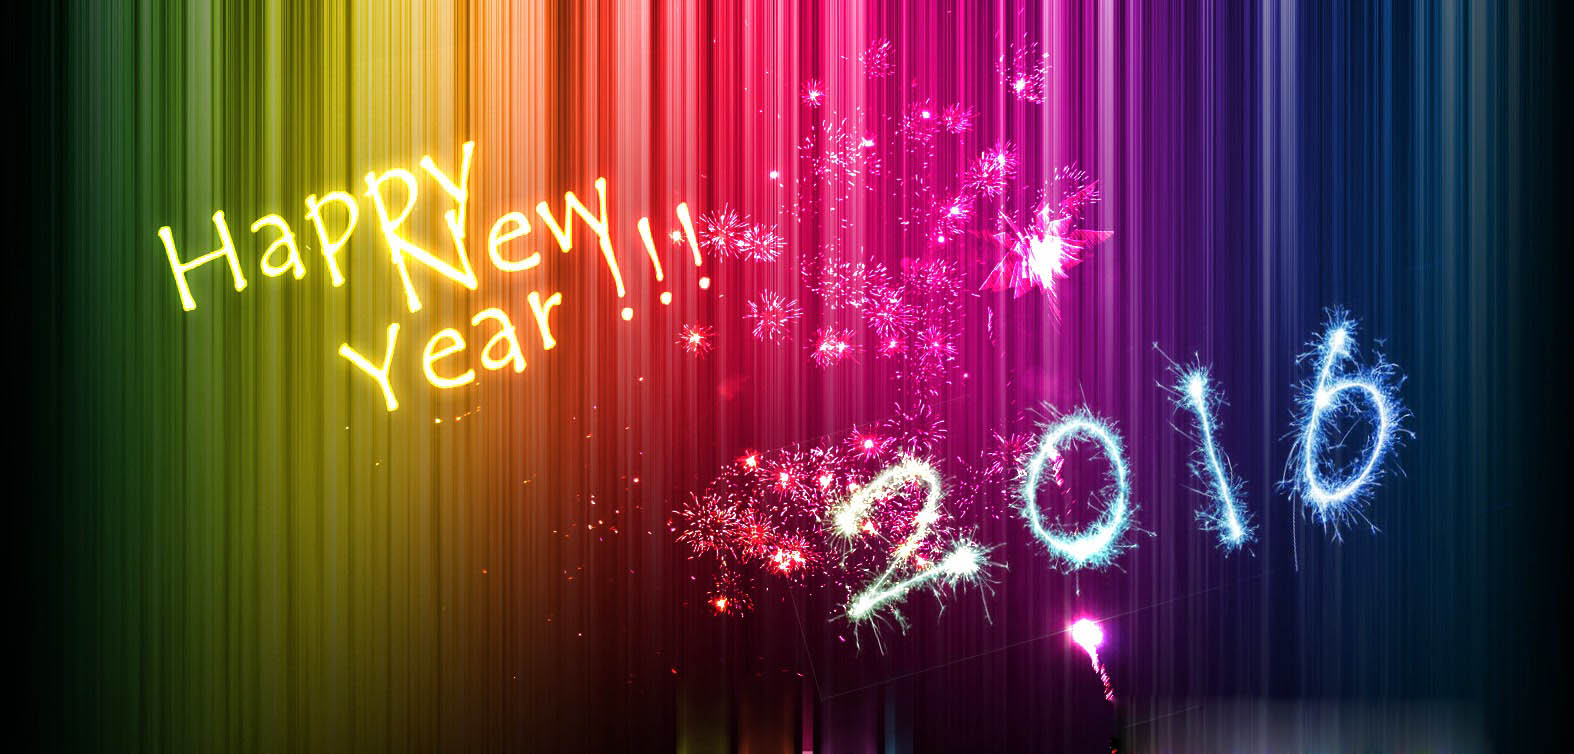 New Year 2016 Wallpapers 624   HD Wallpaper Site